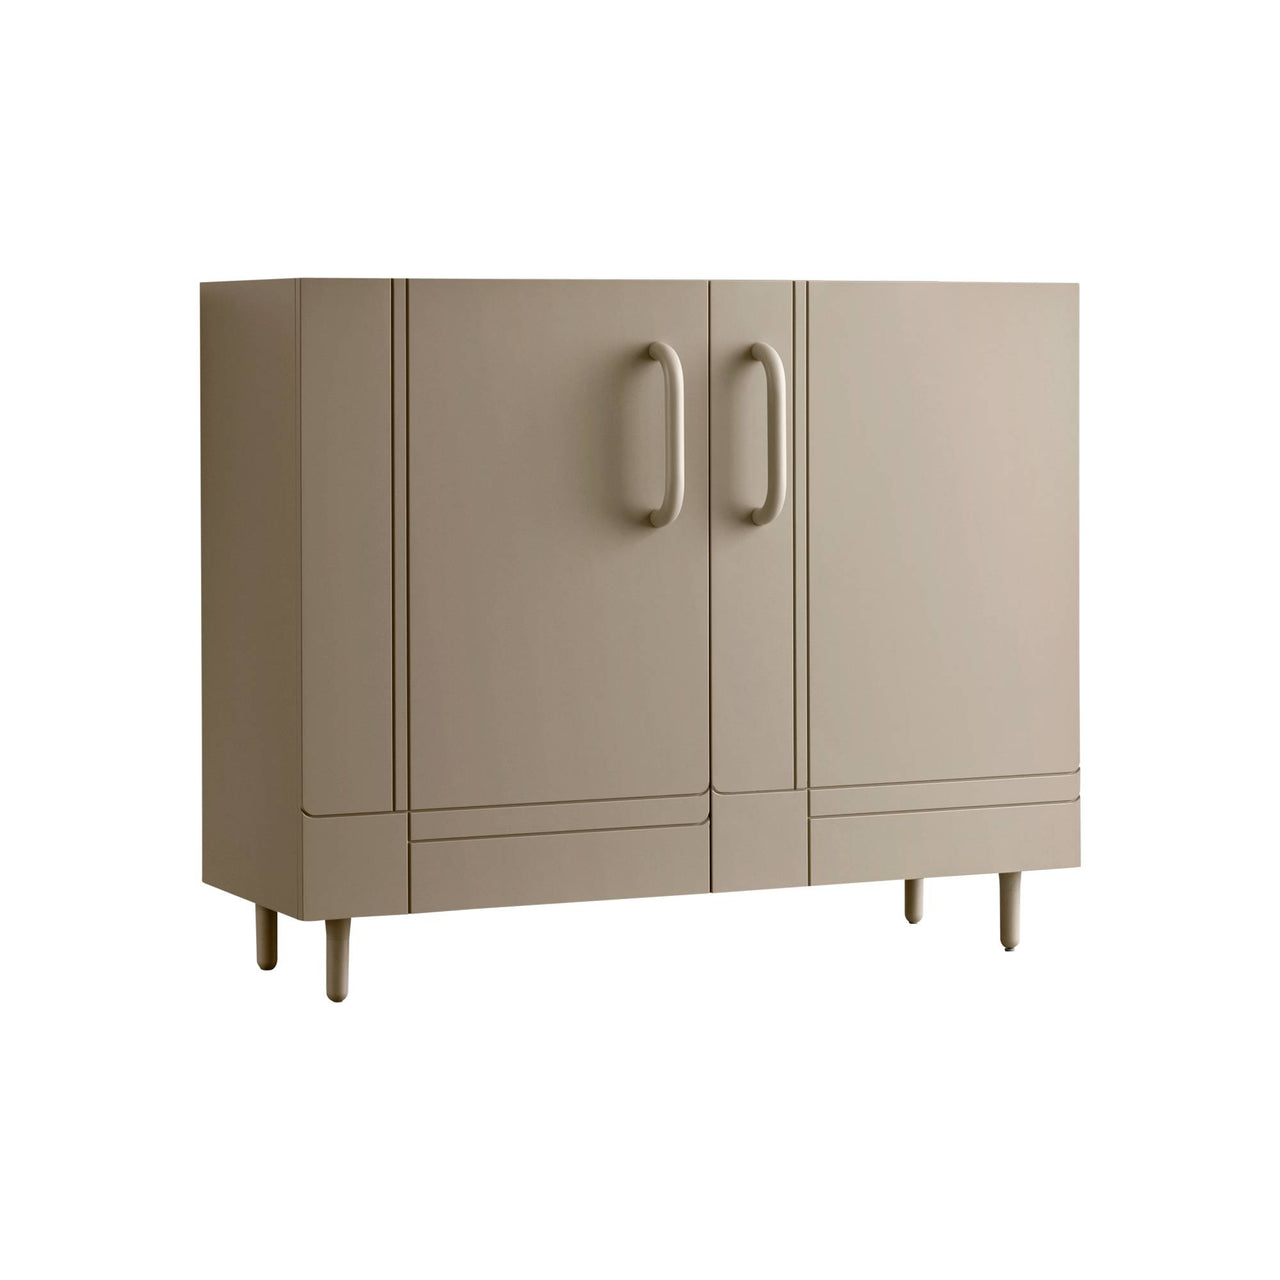 Dalila Cabinet: Vertical + Lacquered Silk Grey + Lacquered Silk Grey